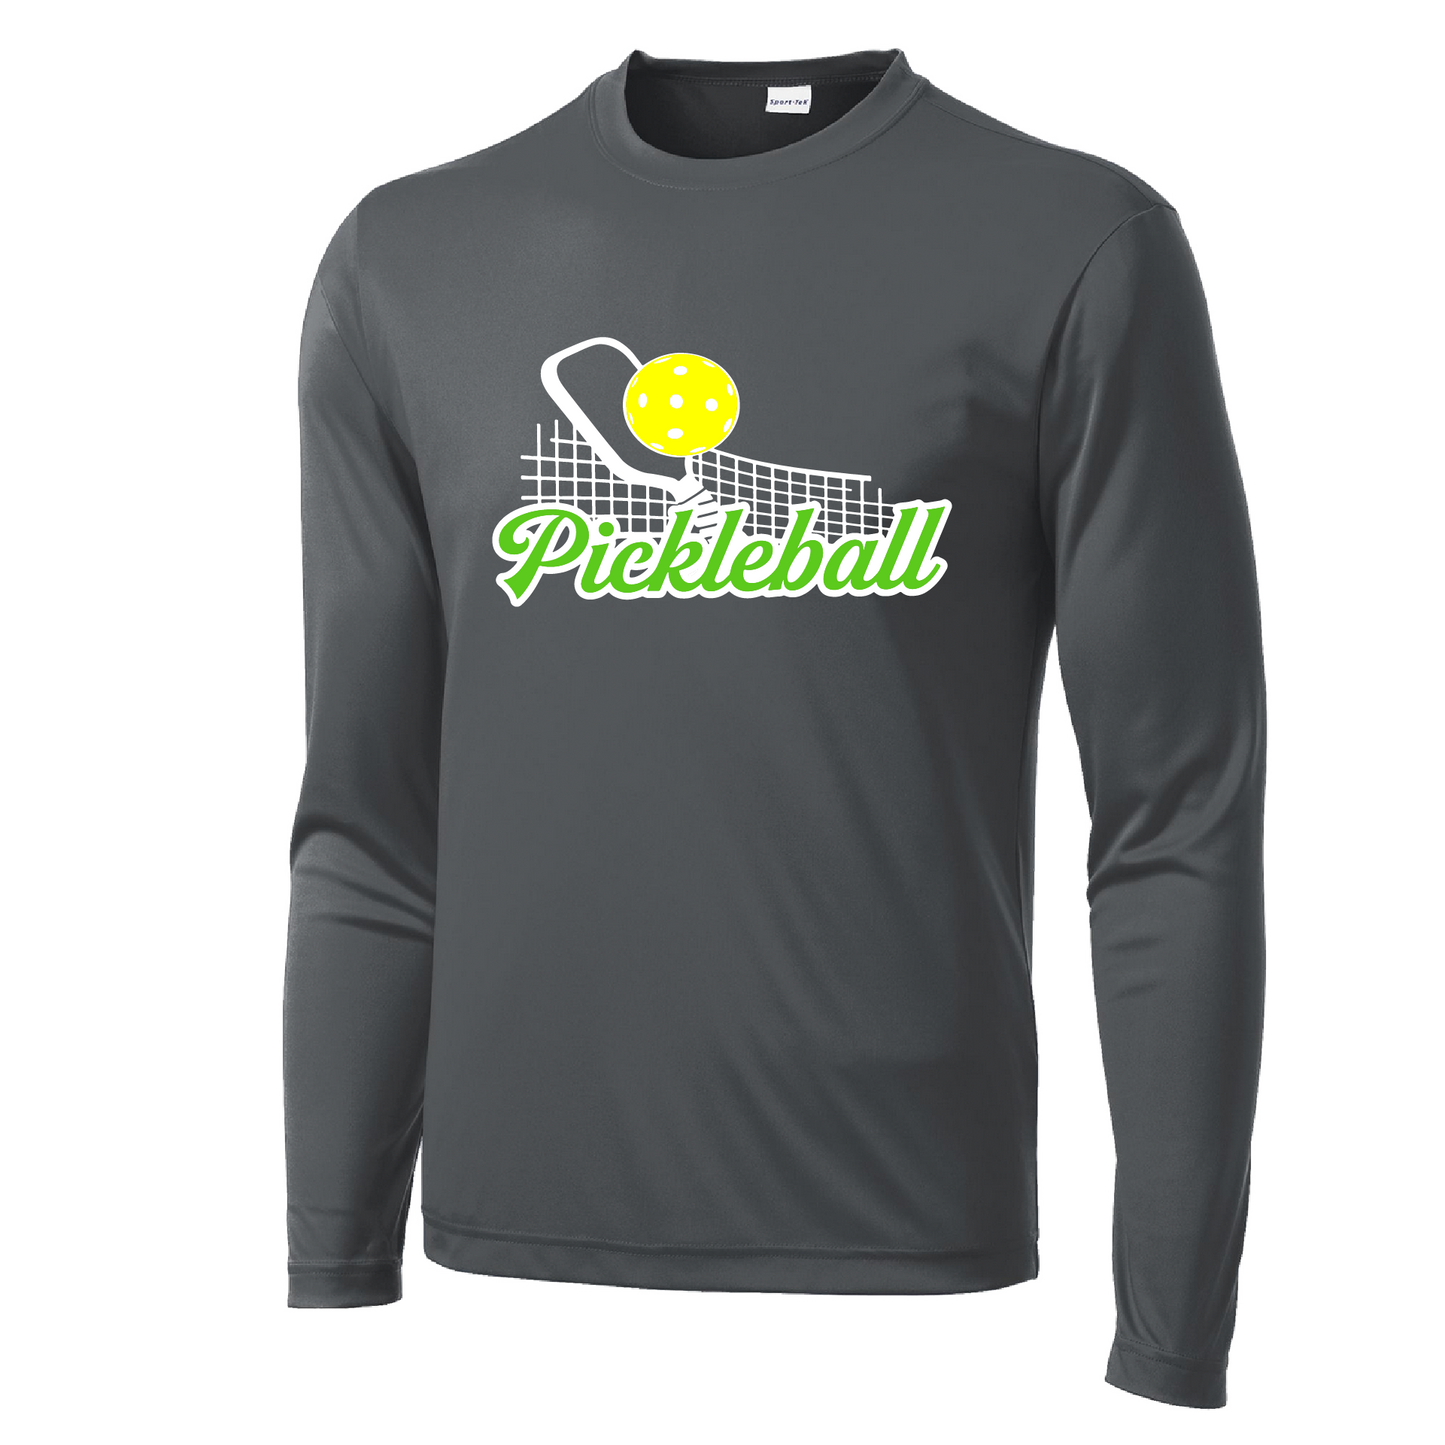 Pickleball Design: Pickleball Net  Men's Style: Long Sleeve  Shirts are lightweight, roomy and highly breathable. These moisture-wicking shirts are designed for athletic performance. They feature PosiCharge technology to lock in color and prevent logos from fading. Removable tag and set-in sleeves for comfort